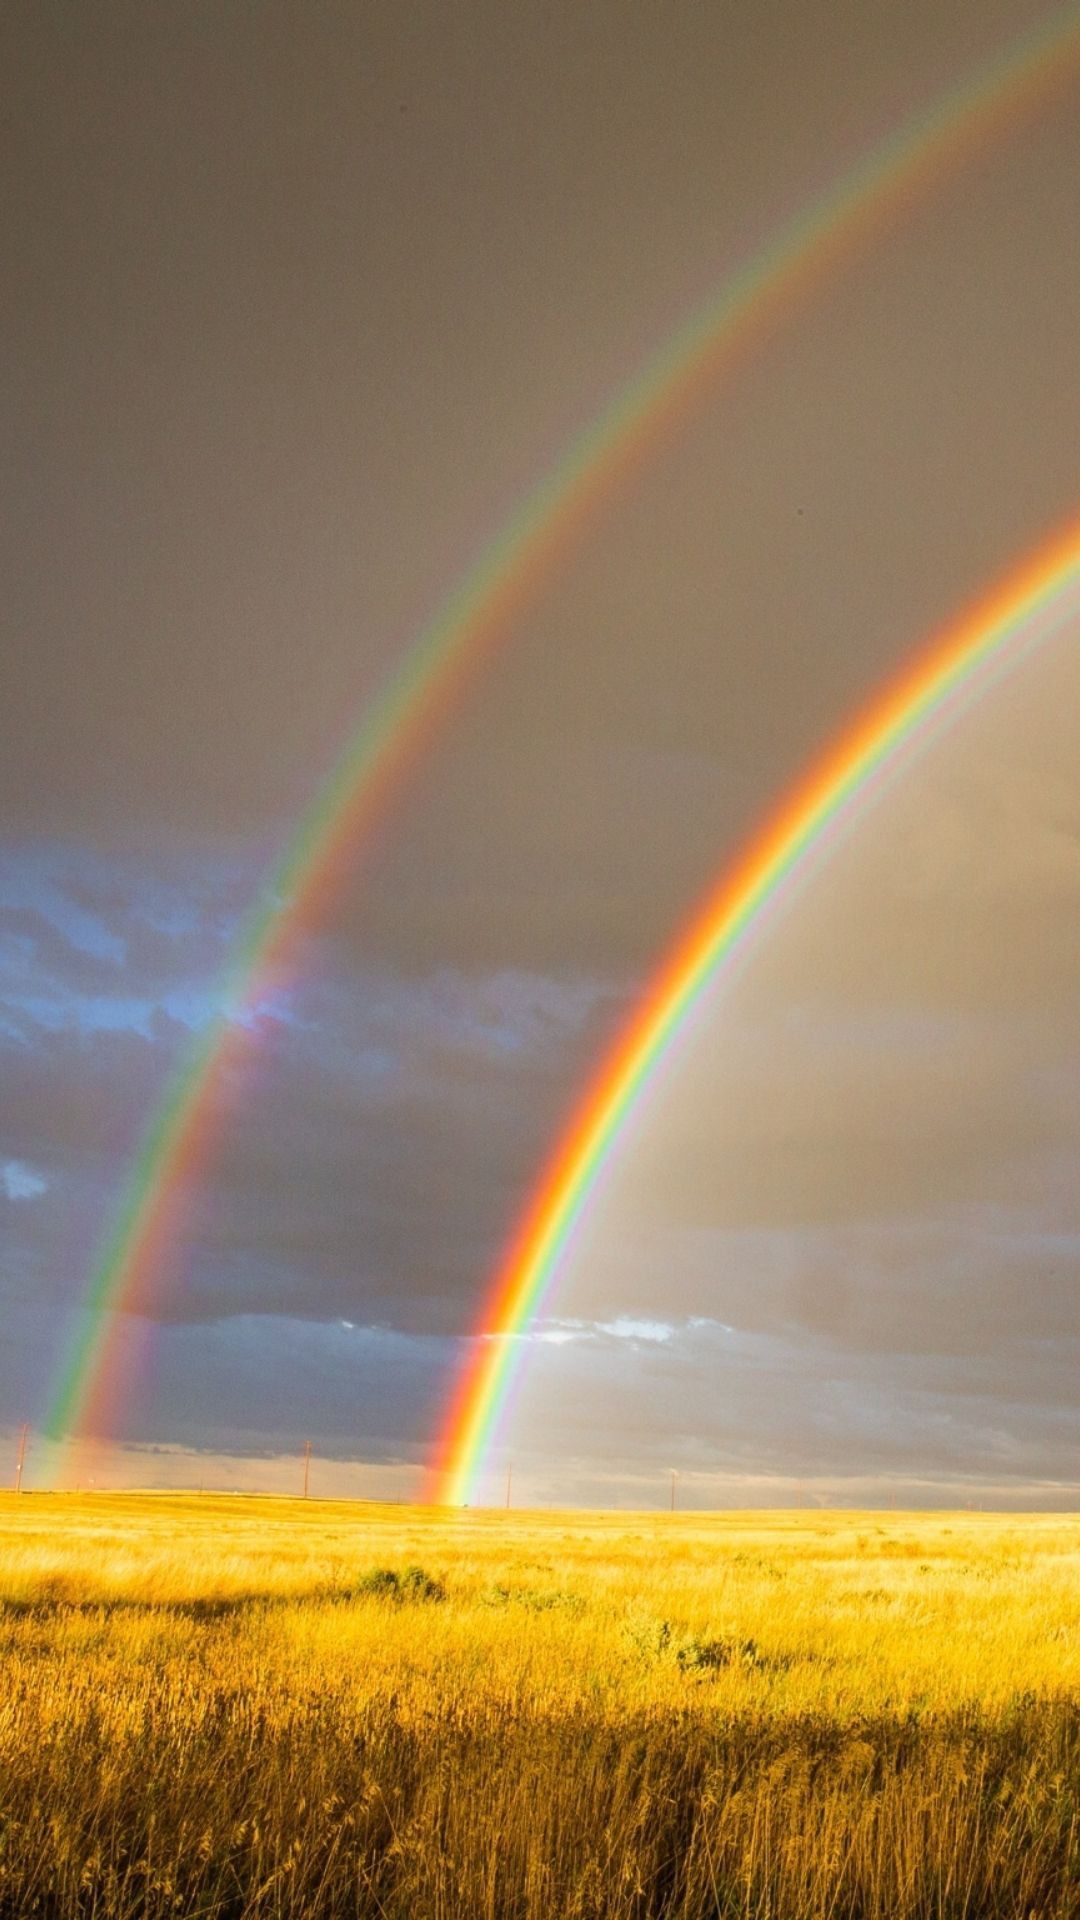 Double Rainbow Meaning Themindfool Perfect Medium For Self Development Mental Health Explorer Of Lifestyle Choices Seeker Of The Spiritual Journey